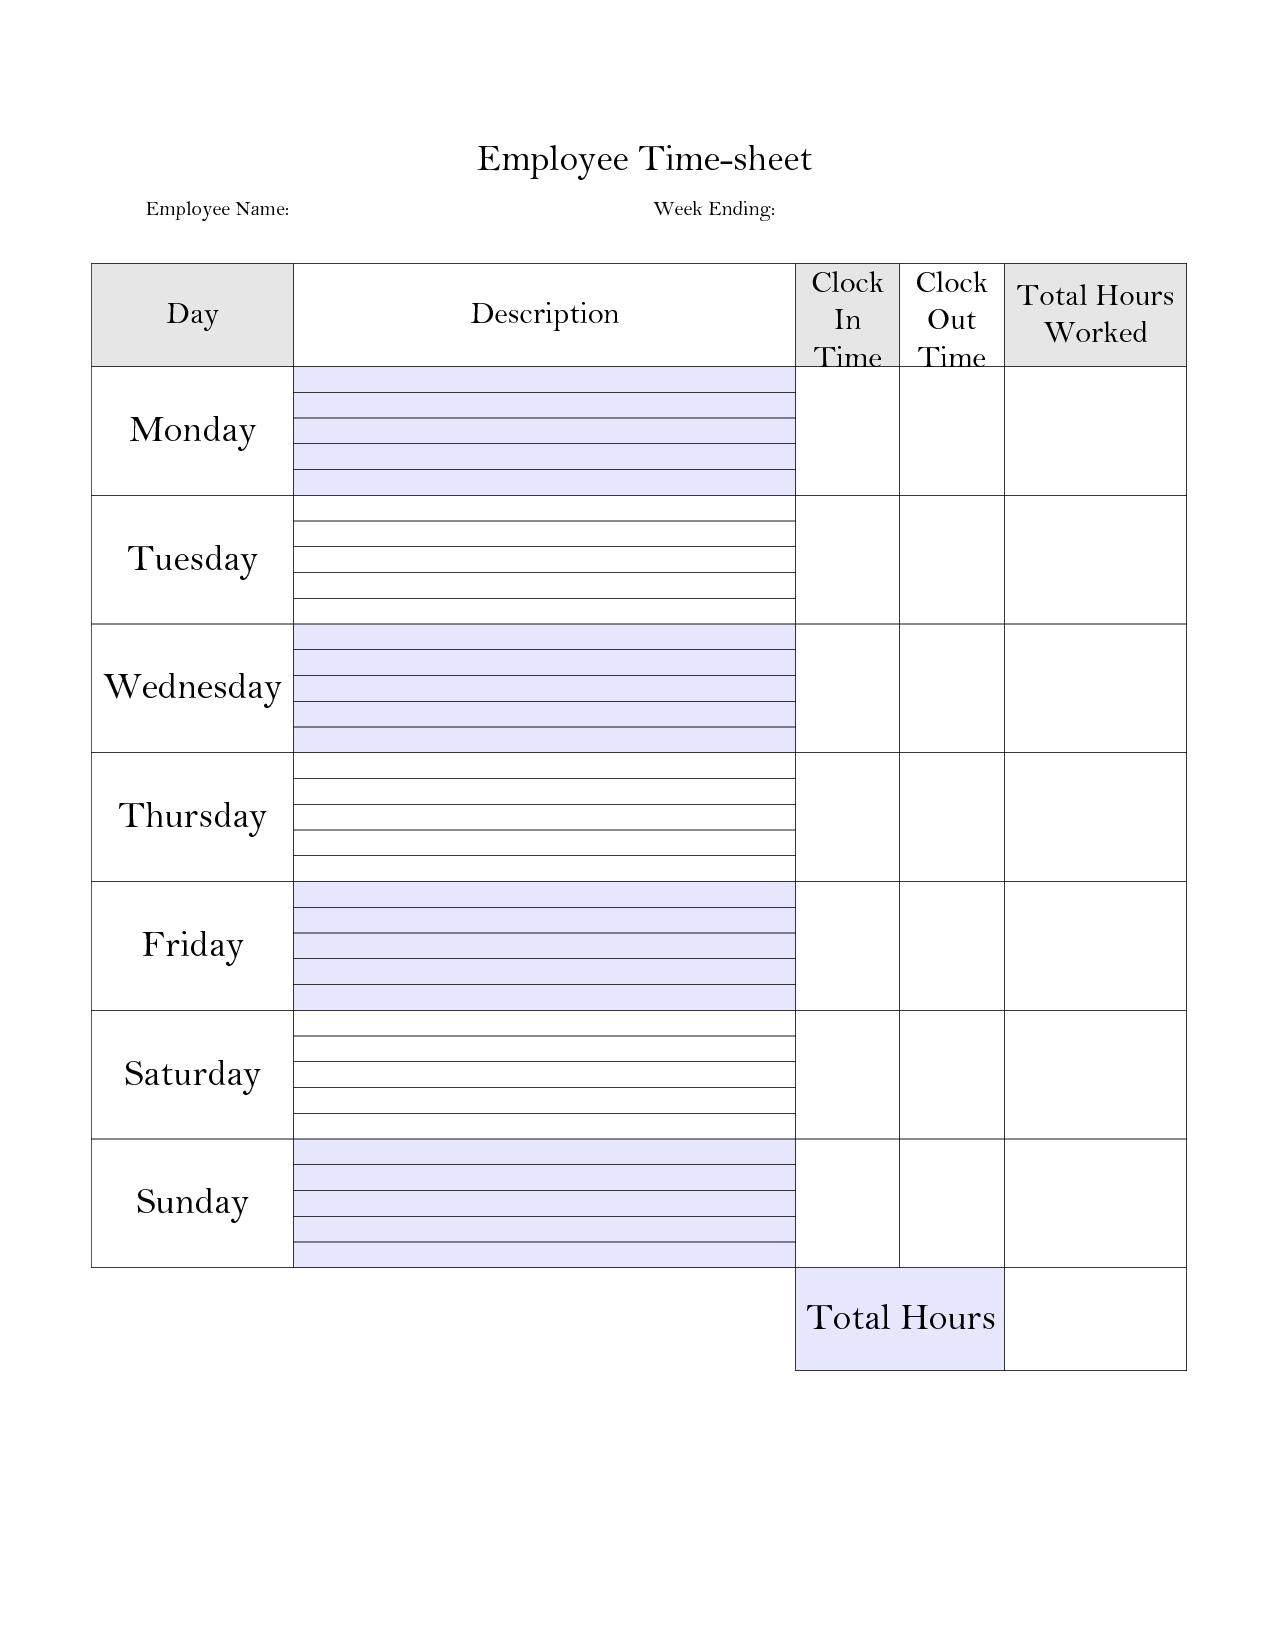 5-best-images-of-printable-employee-time-card-template-free-printable